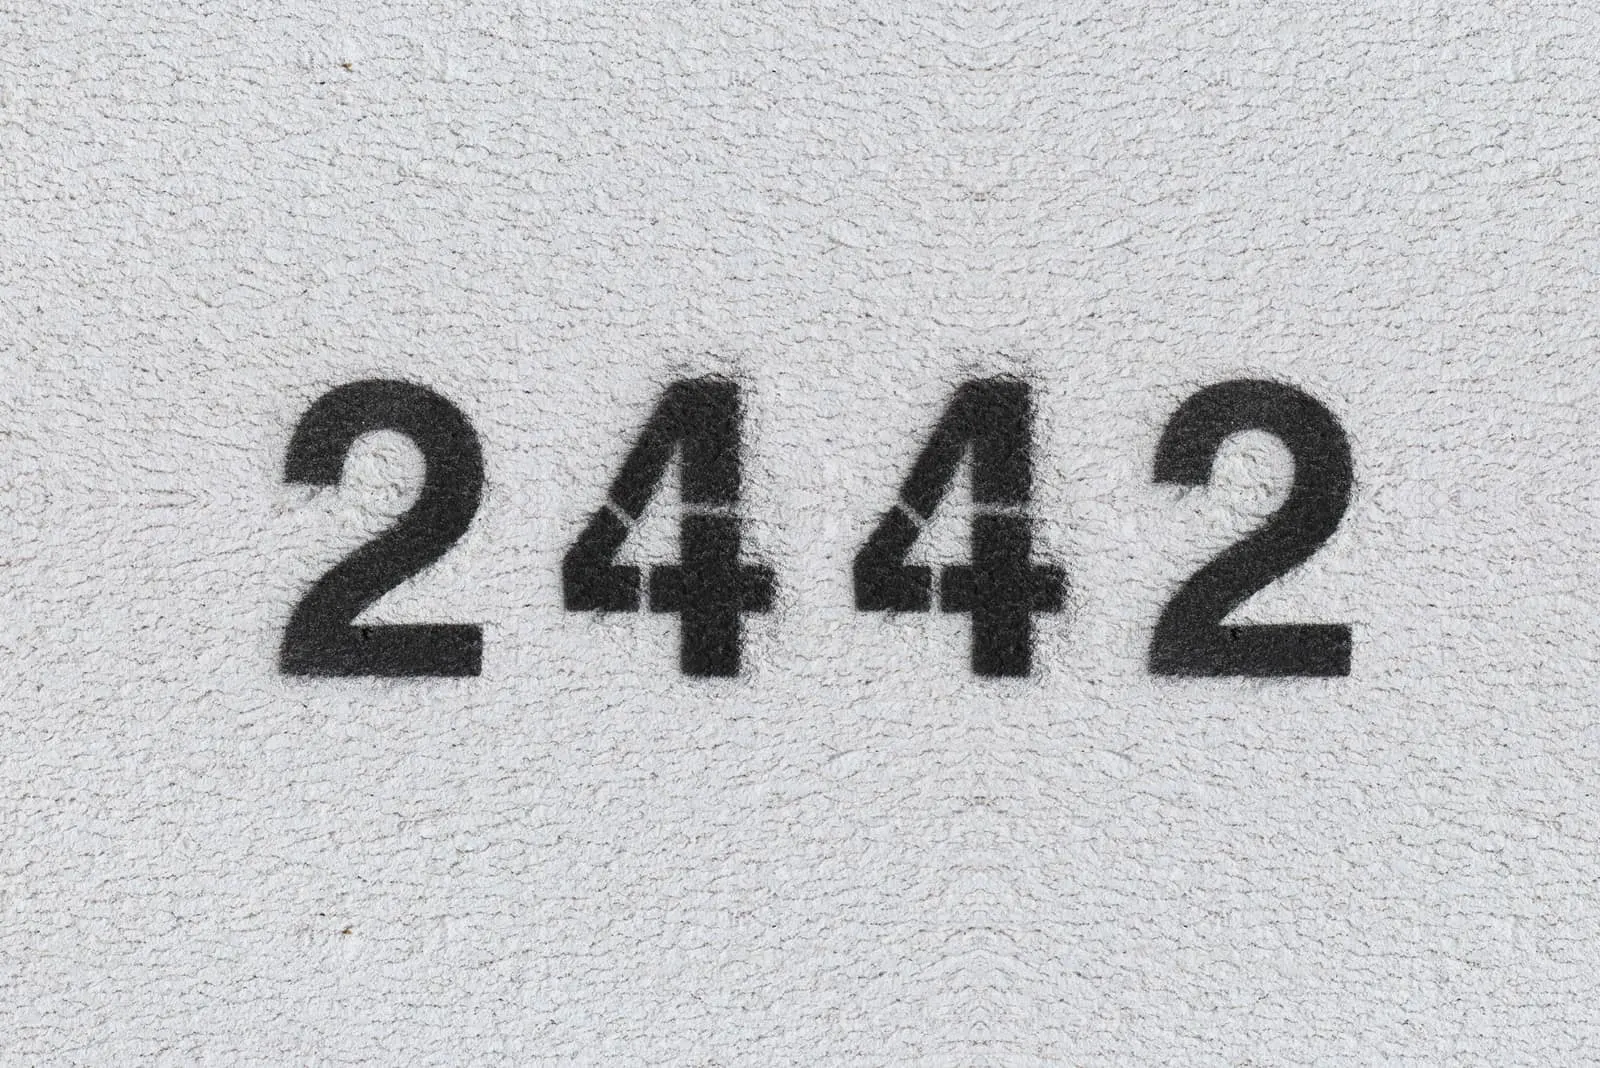 black 2442 angel number with grey background